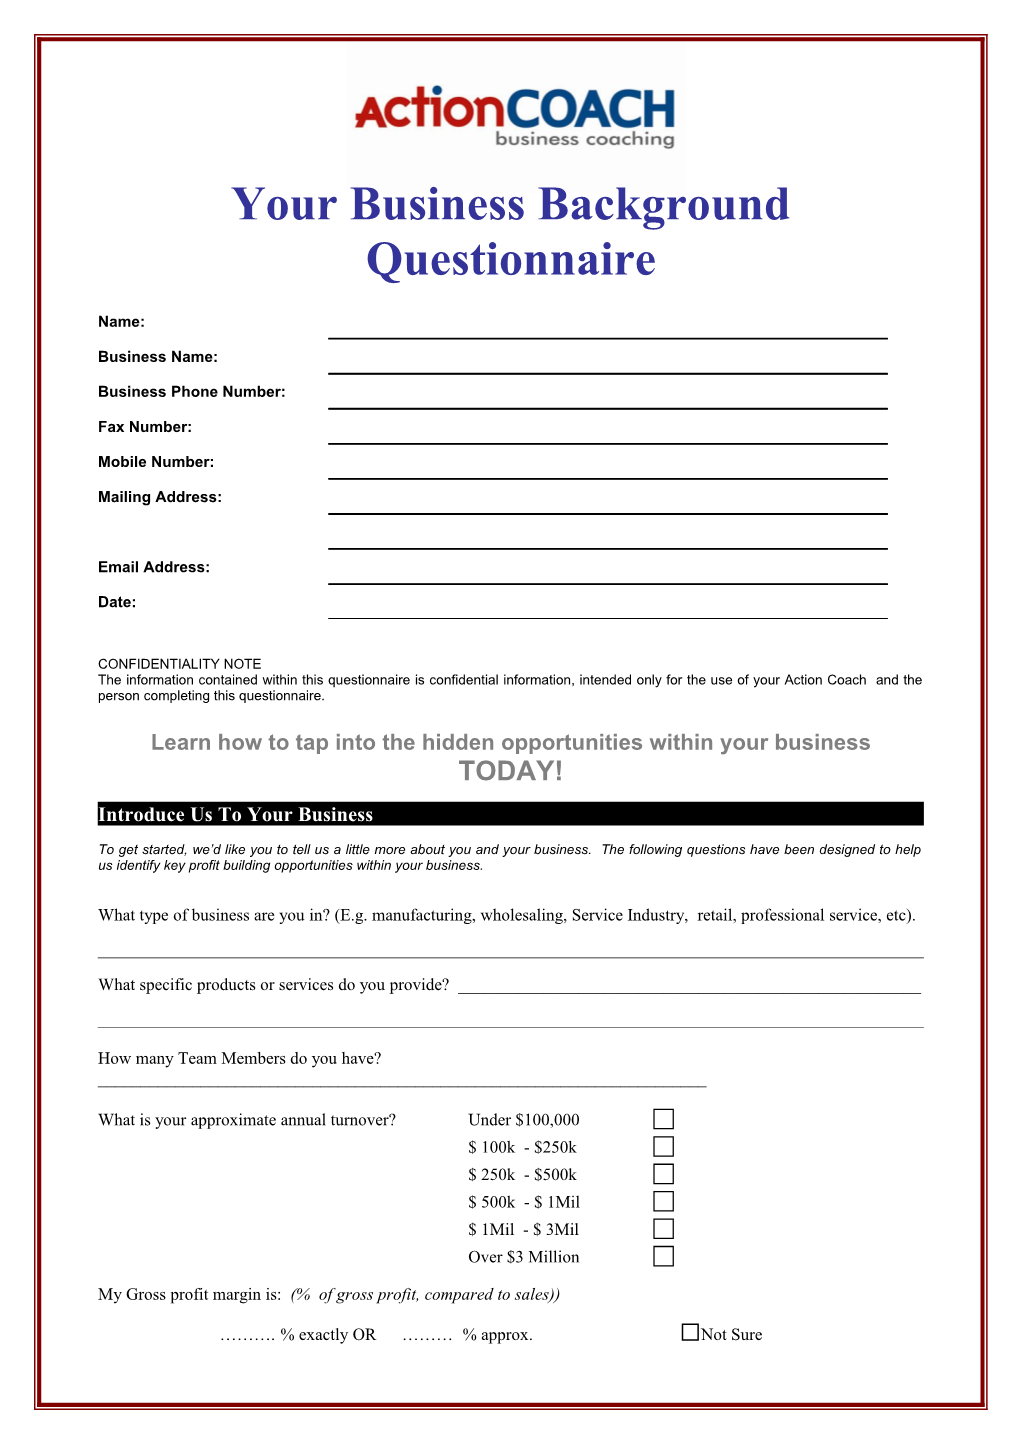 Your Business Background Questionnaire